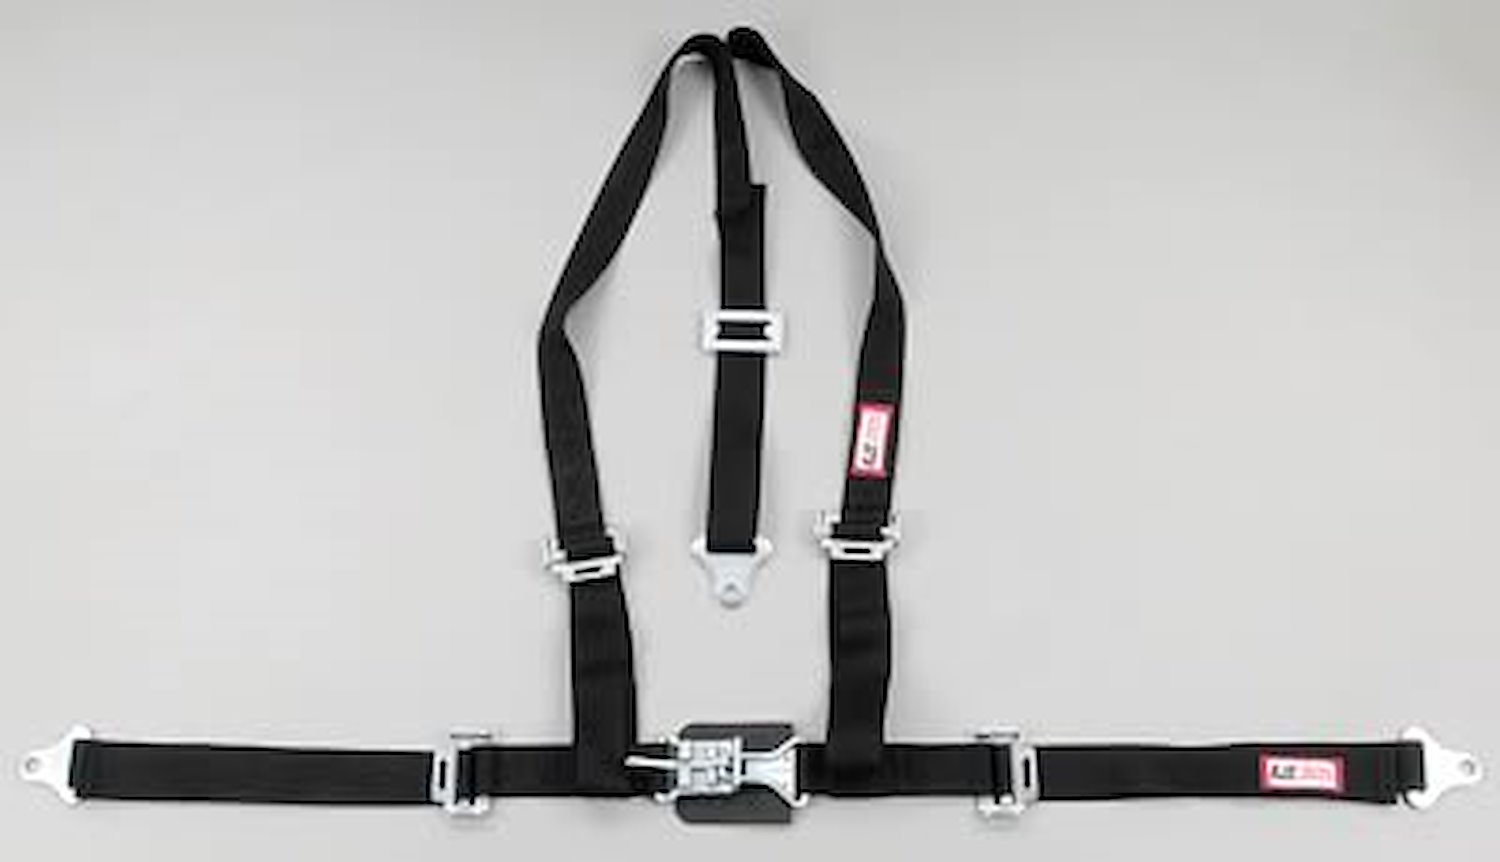 NON-SFI L&L HARNESS 3 PULL UP Lap BELT SNAP SEWN IN 2 S.H. Y FLOOR Mount w/STERNUM STRAP WRAP/SNAP HOT PINK